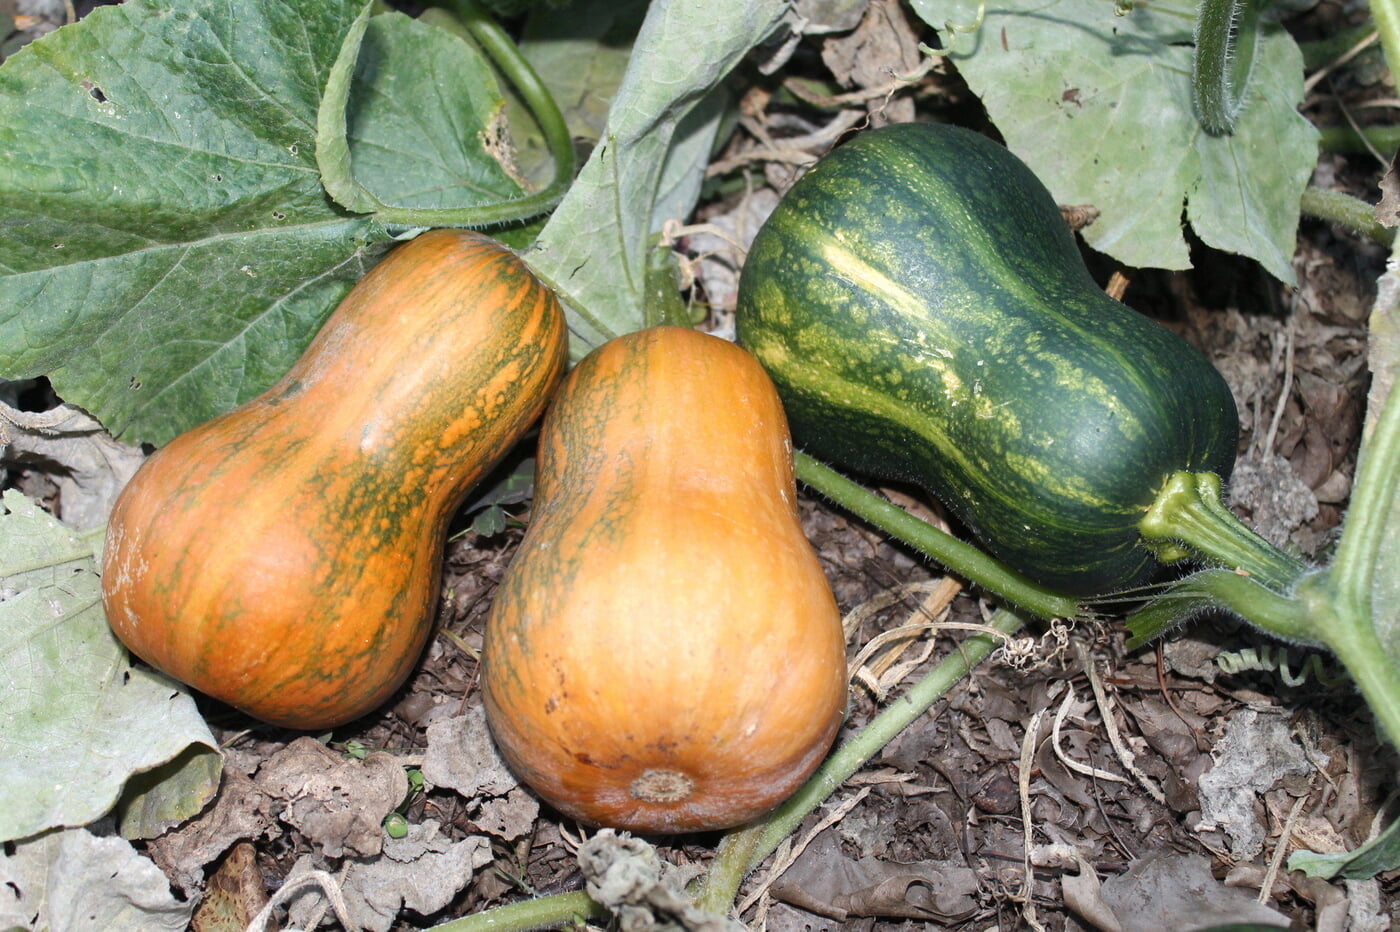 Winter squash - reminders of summer.